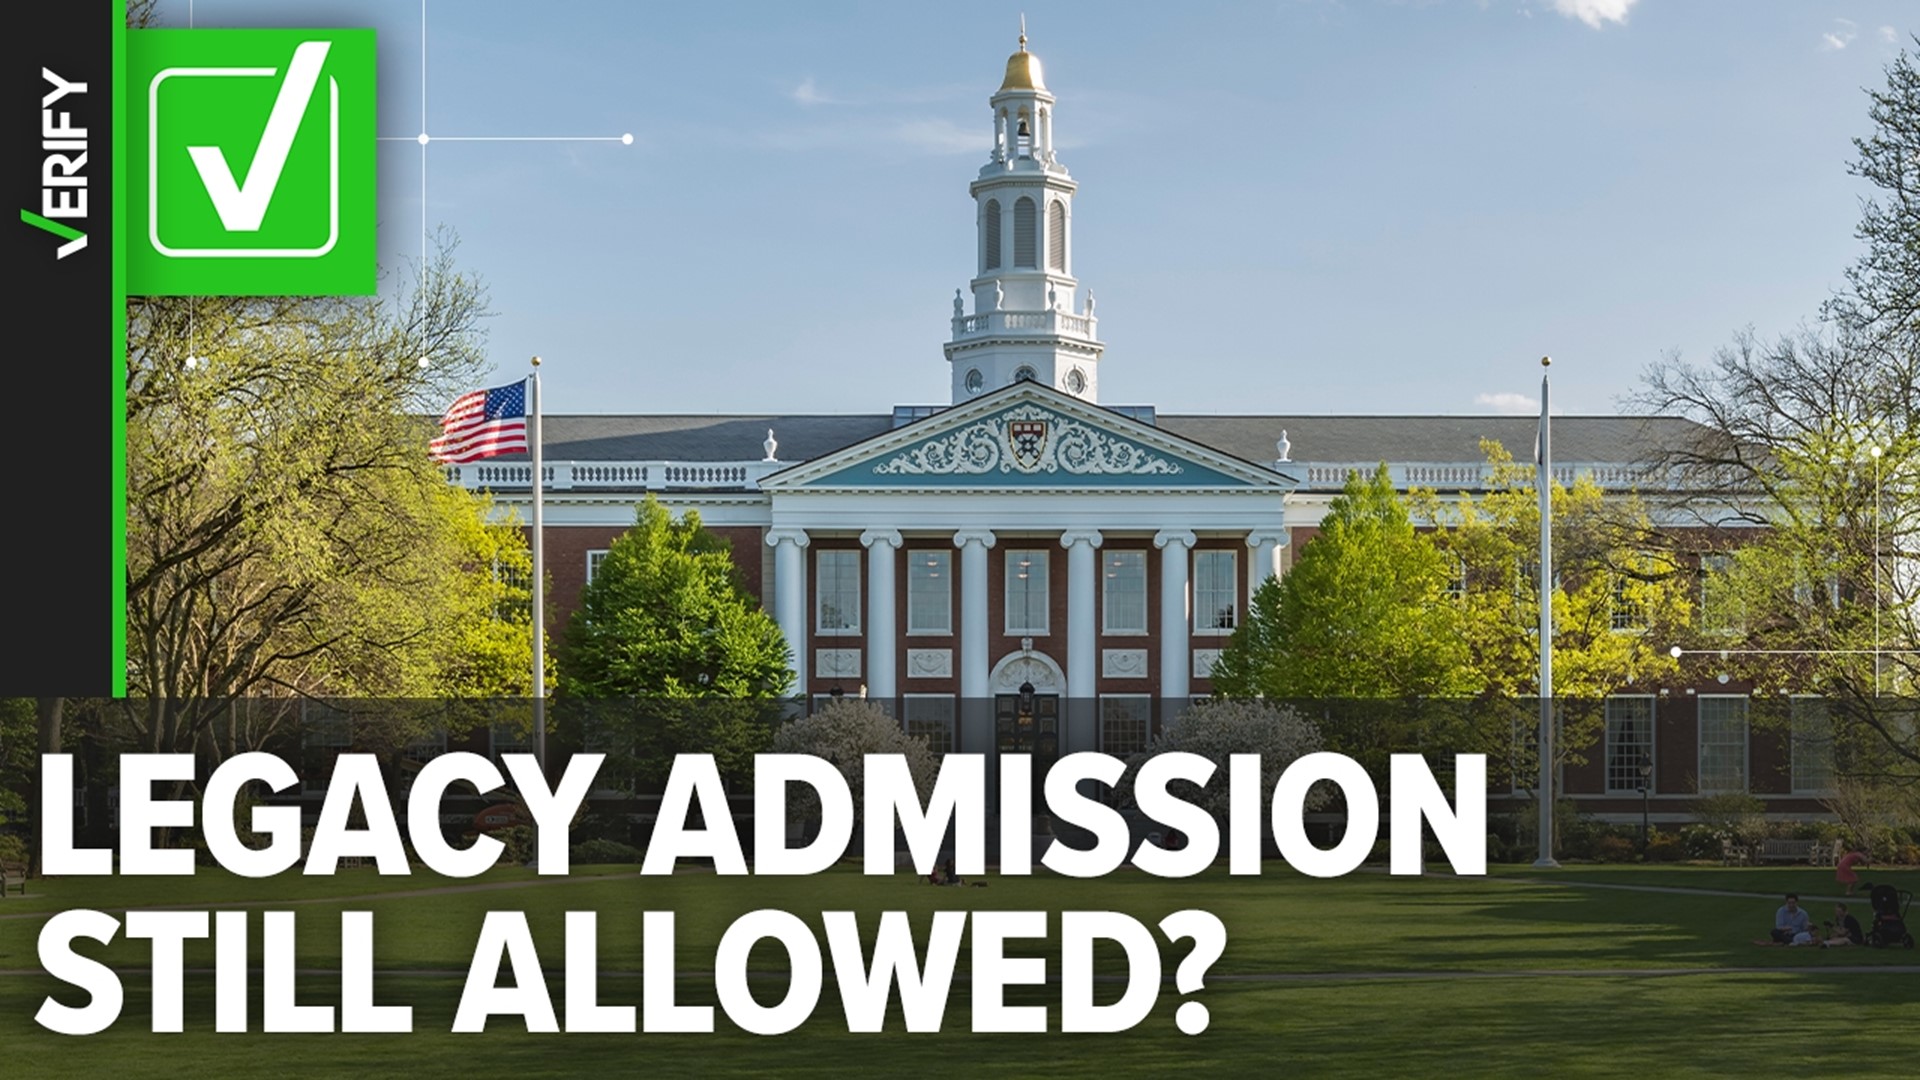 Time to abandon legacy admissions.